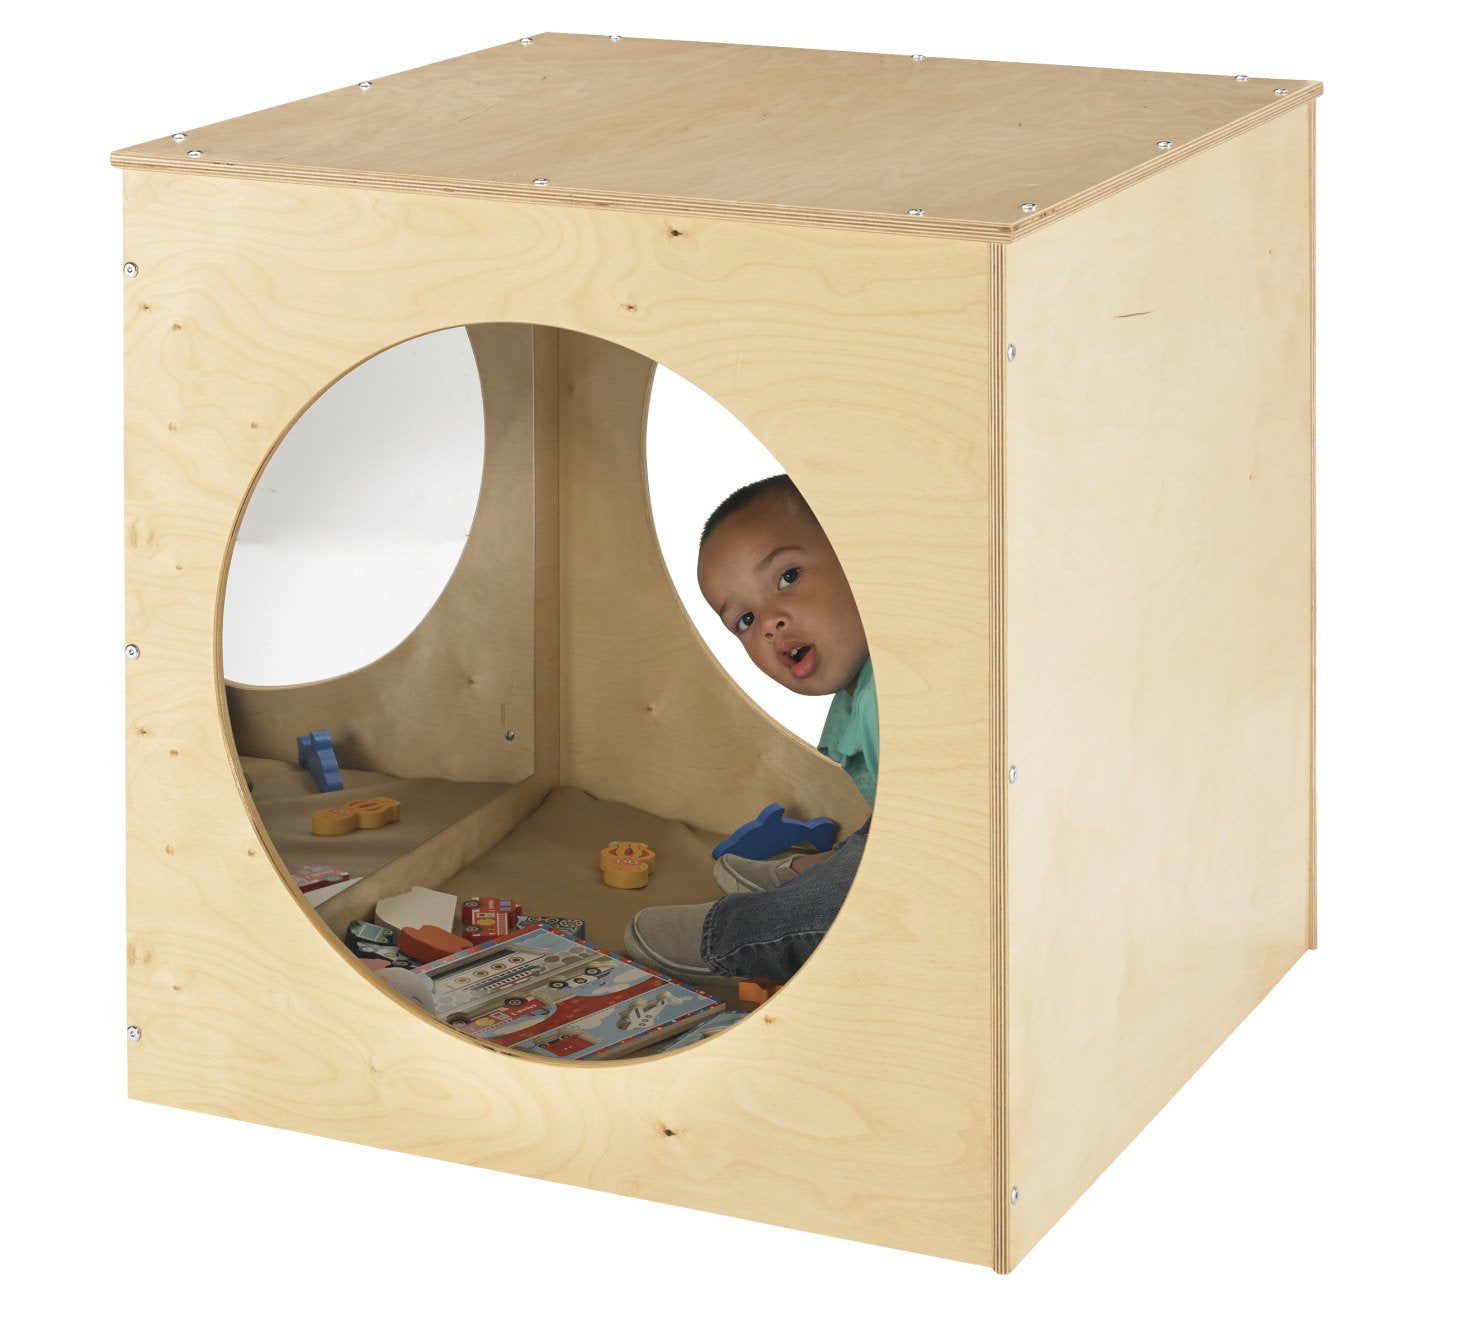 1491056 Reflection Cozy Cube, 30 X 30 Inches Height,30 Inches Width,30 Inches Length,Natural Wood